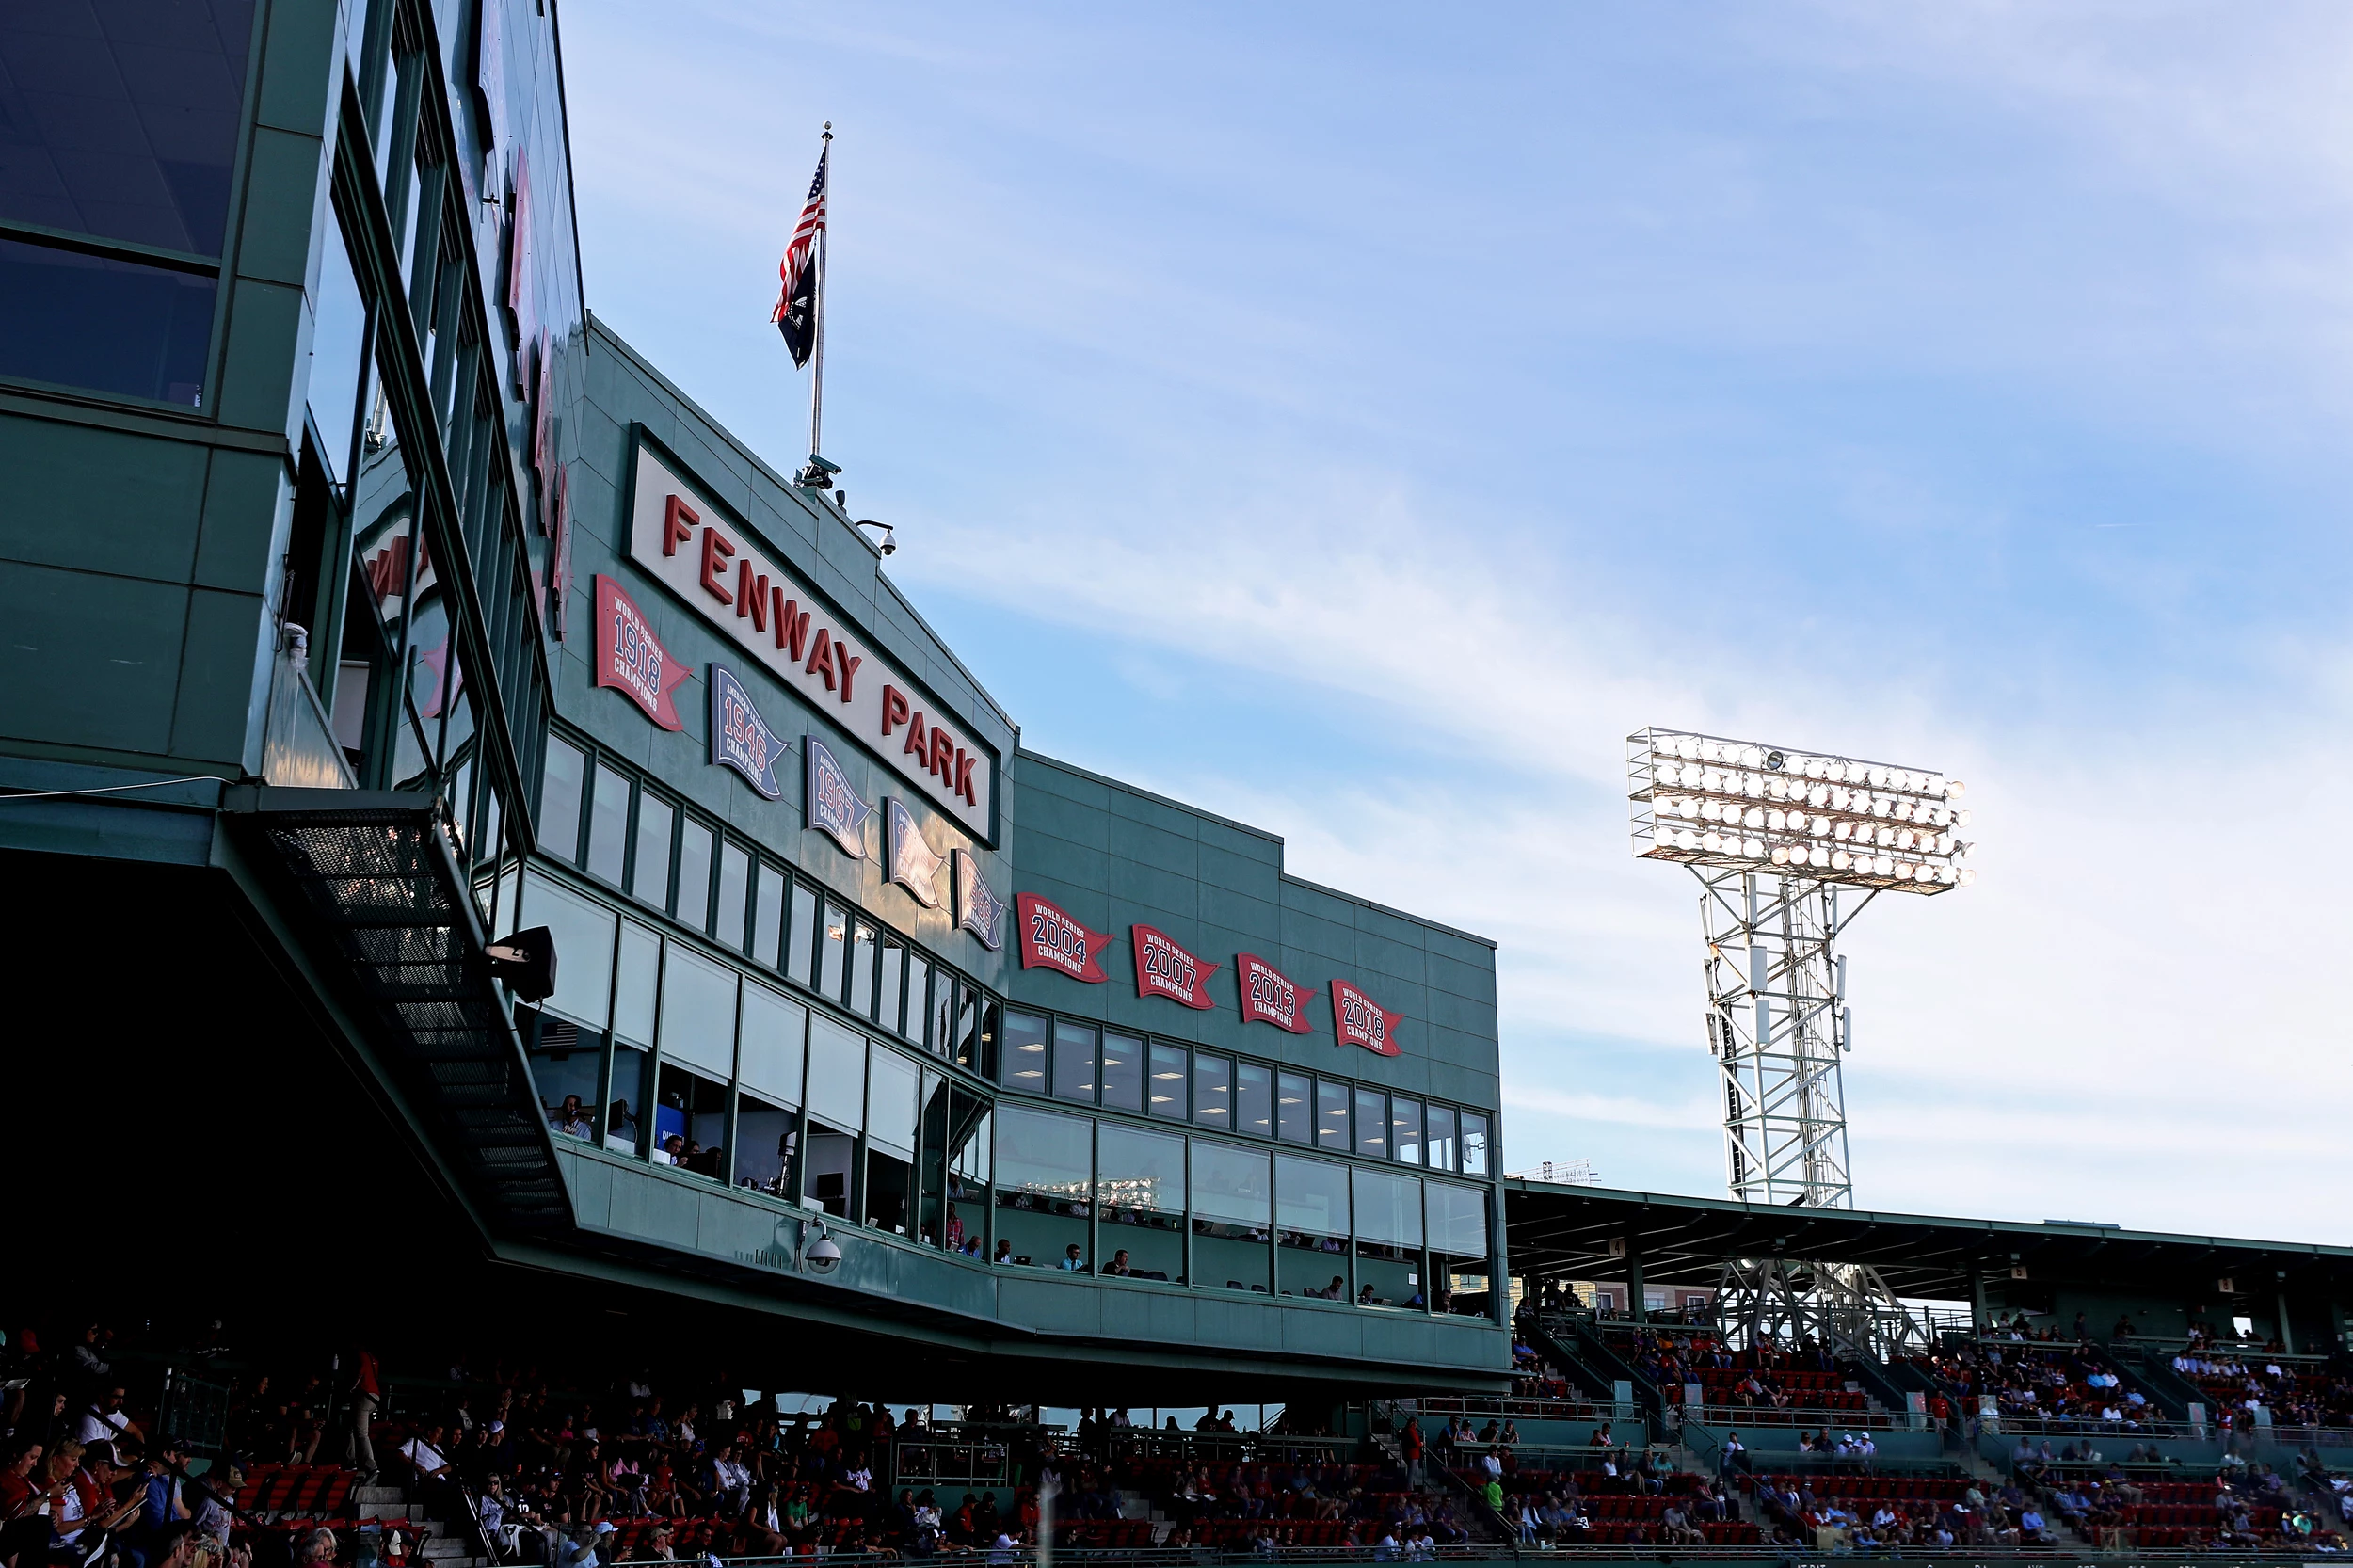 red sox schedule august 2021